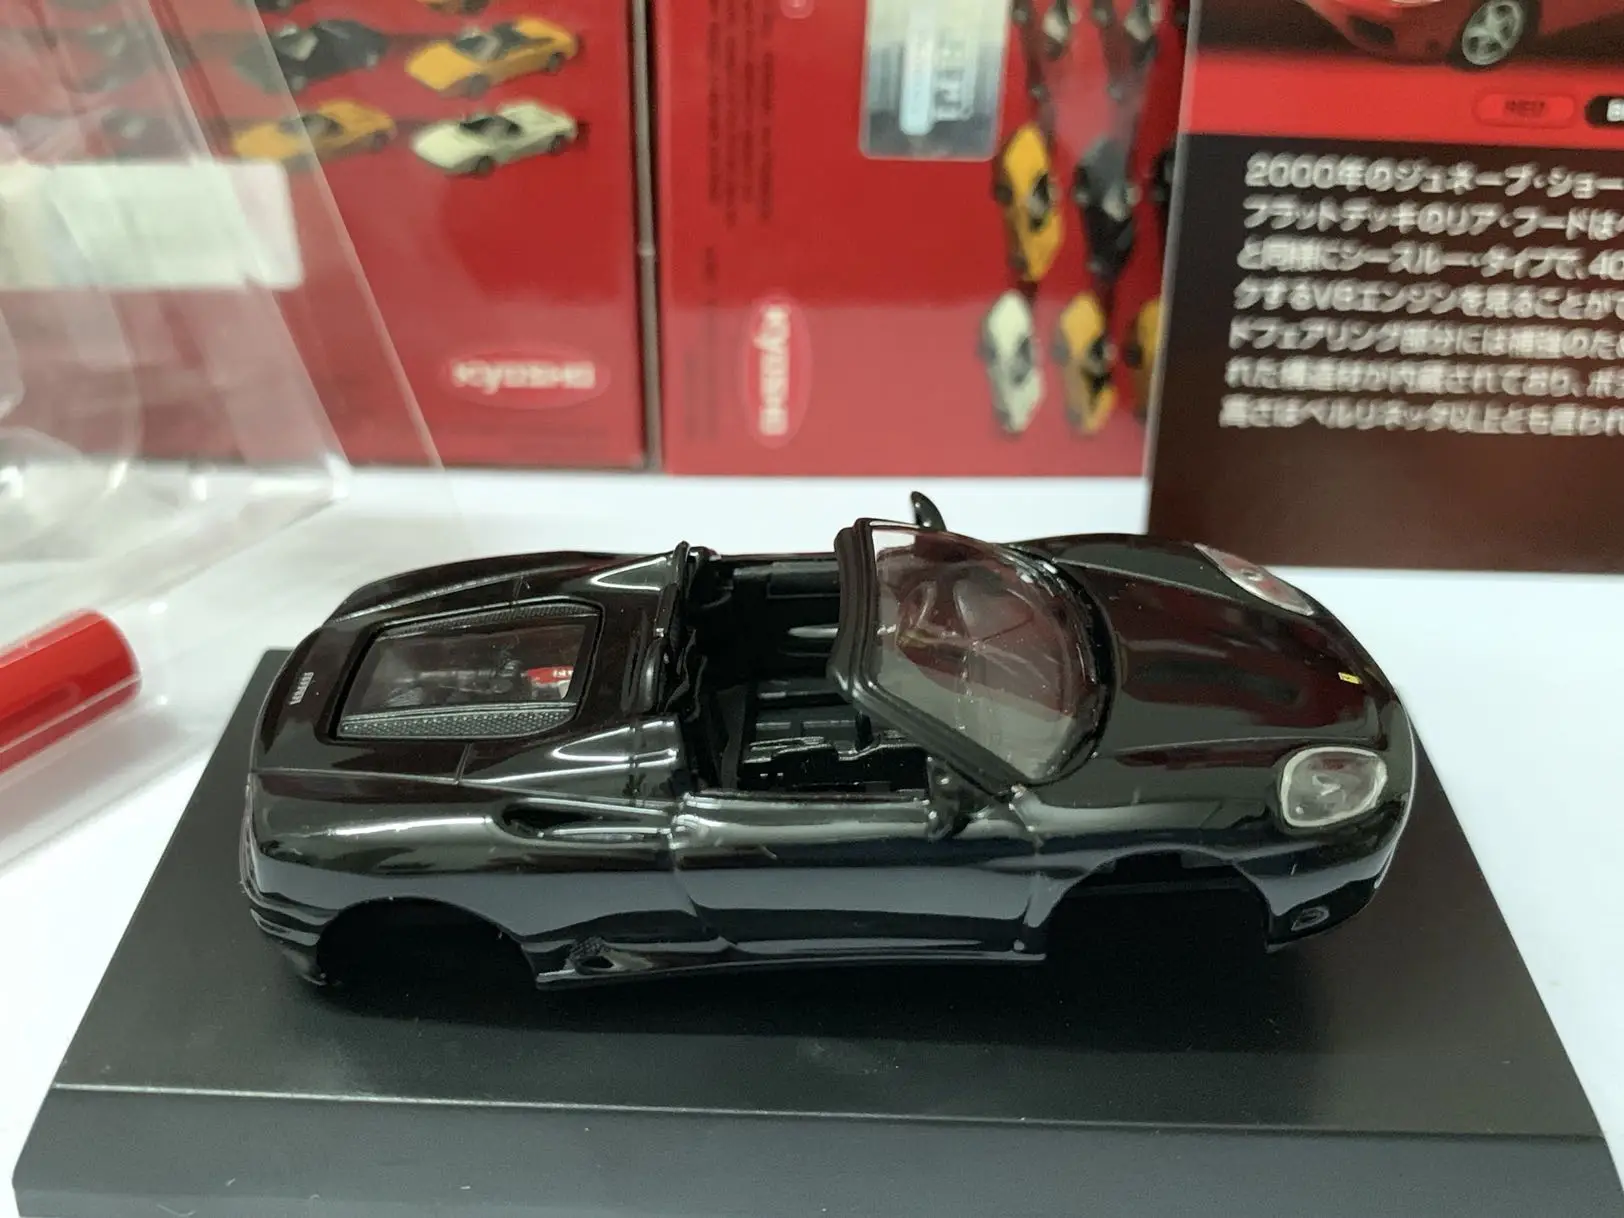 1/64 KYOSHO Ferrari 360 Spider Collection of die-cast alloy assembled car decoration model toys